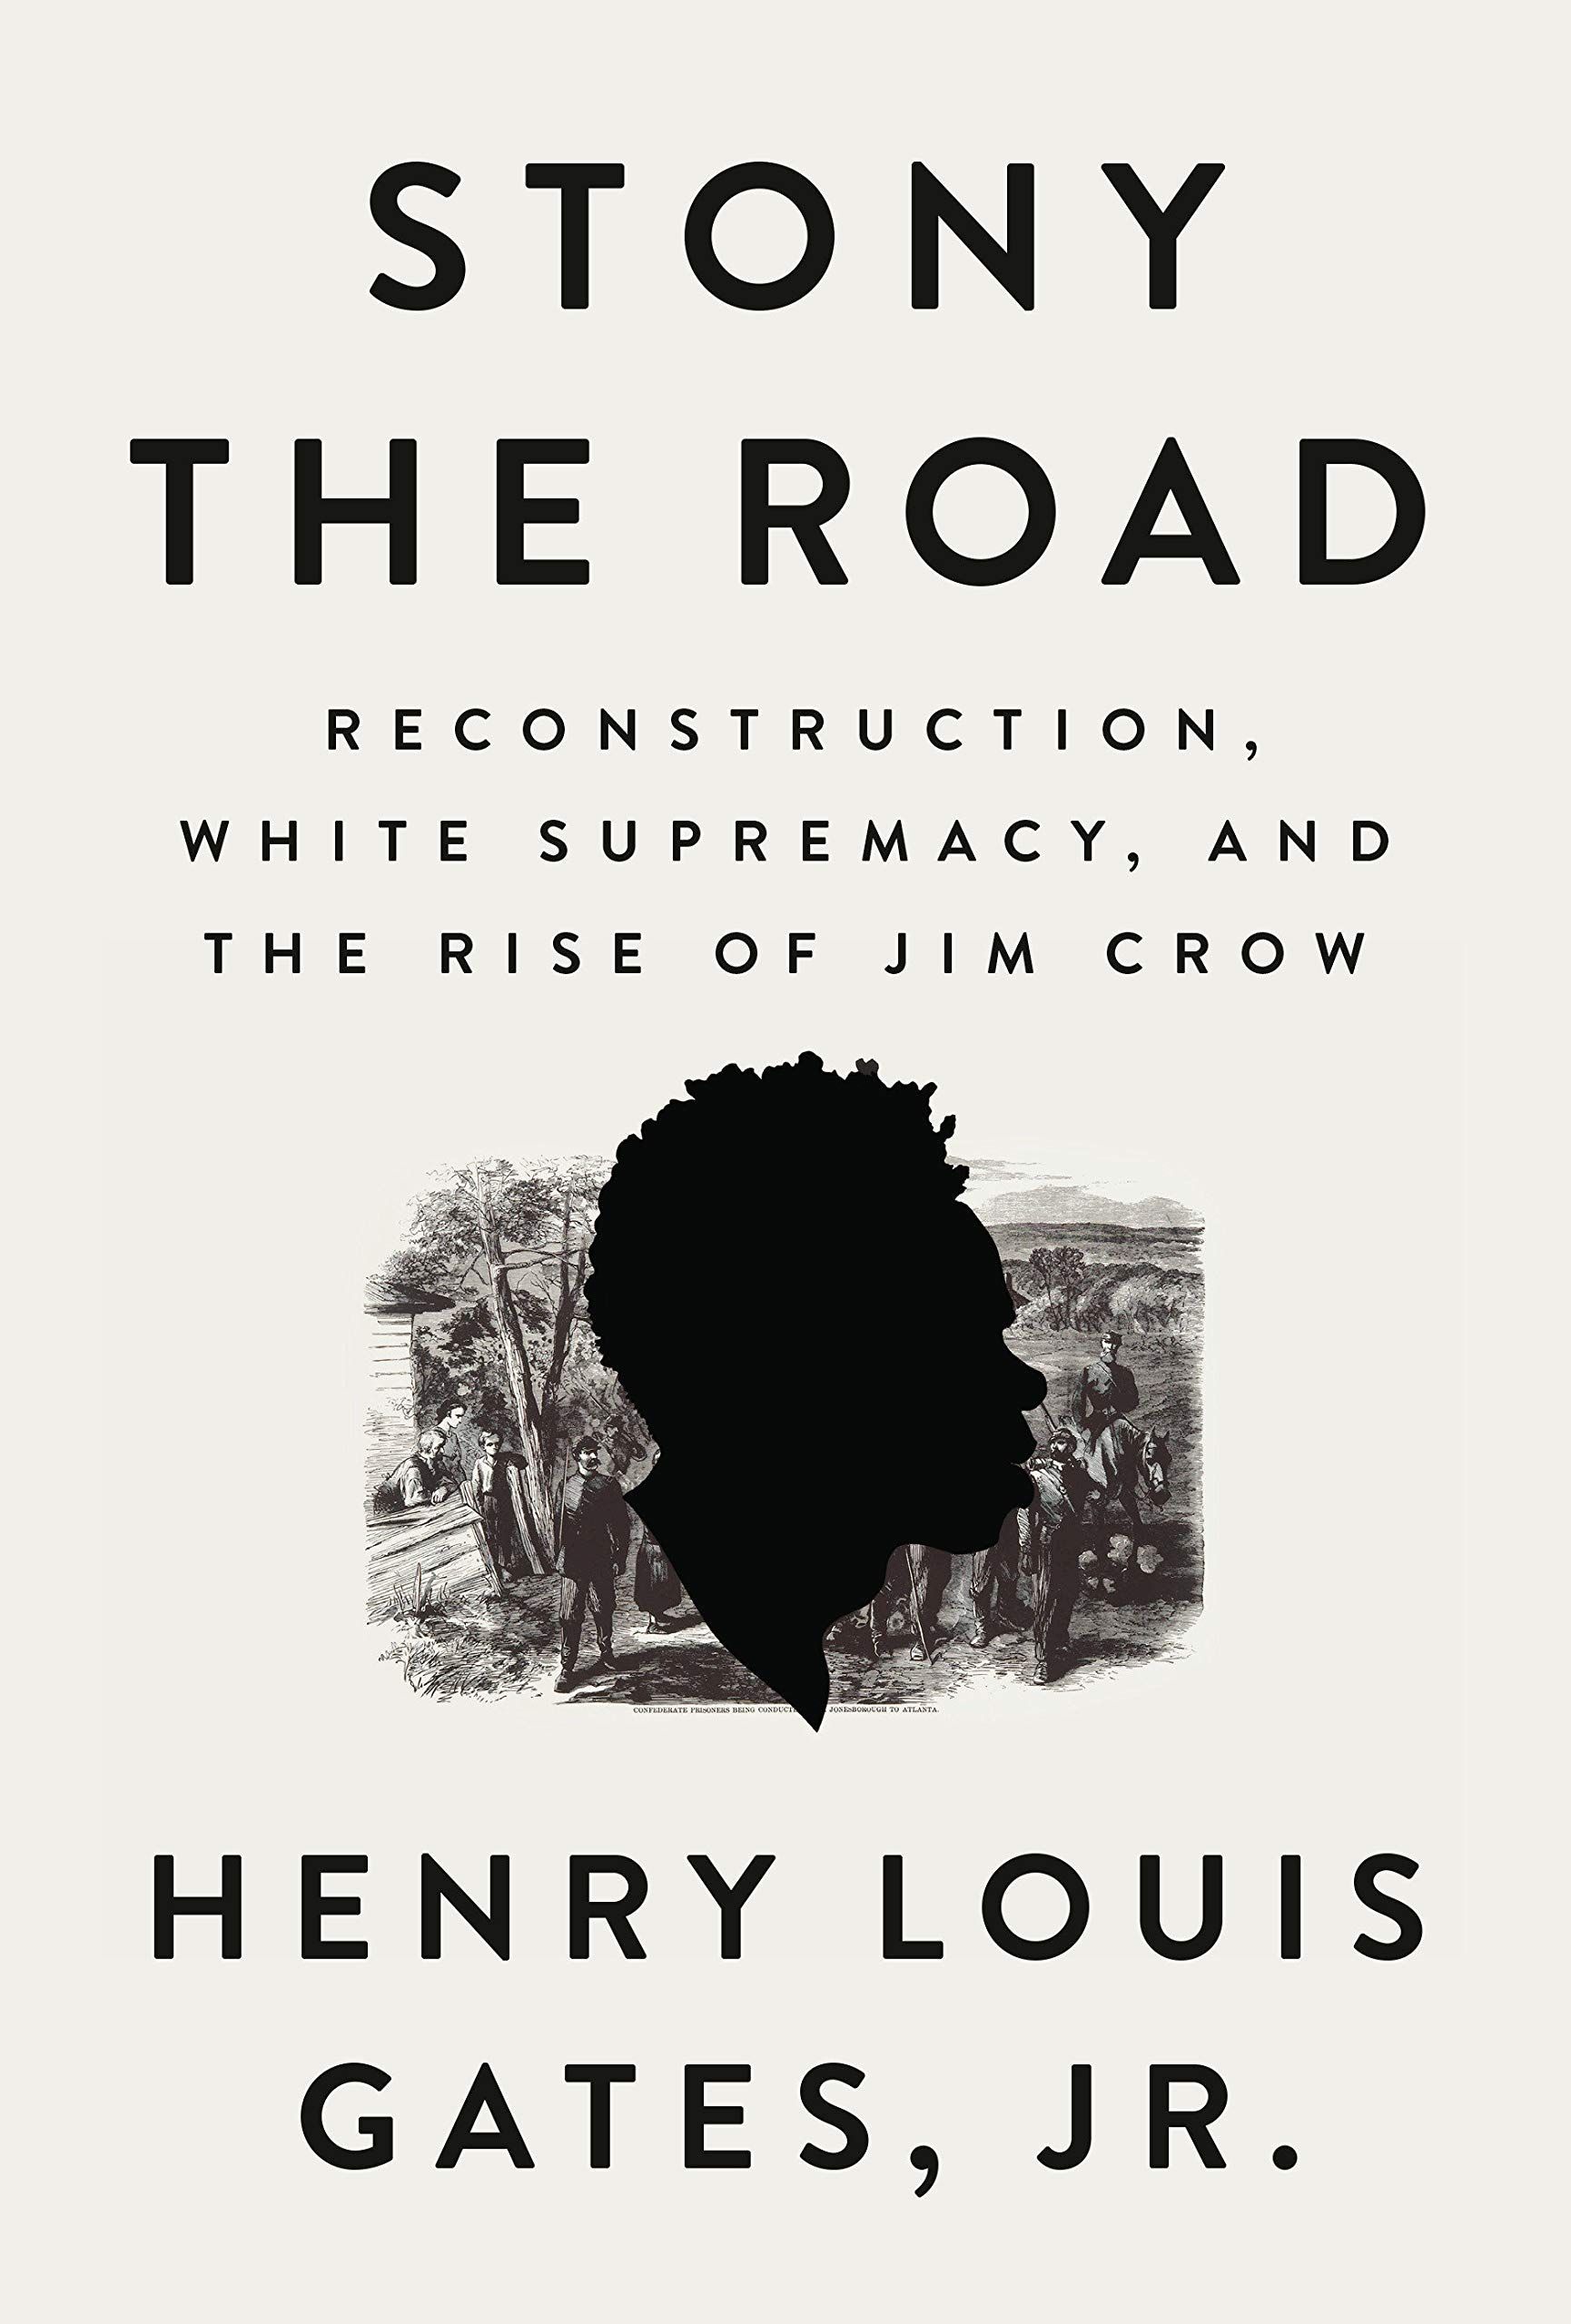 An Unreconstructed Nation: On Henry Louis Gates Jr.’s “Stony the Road”